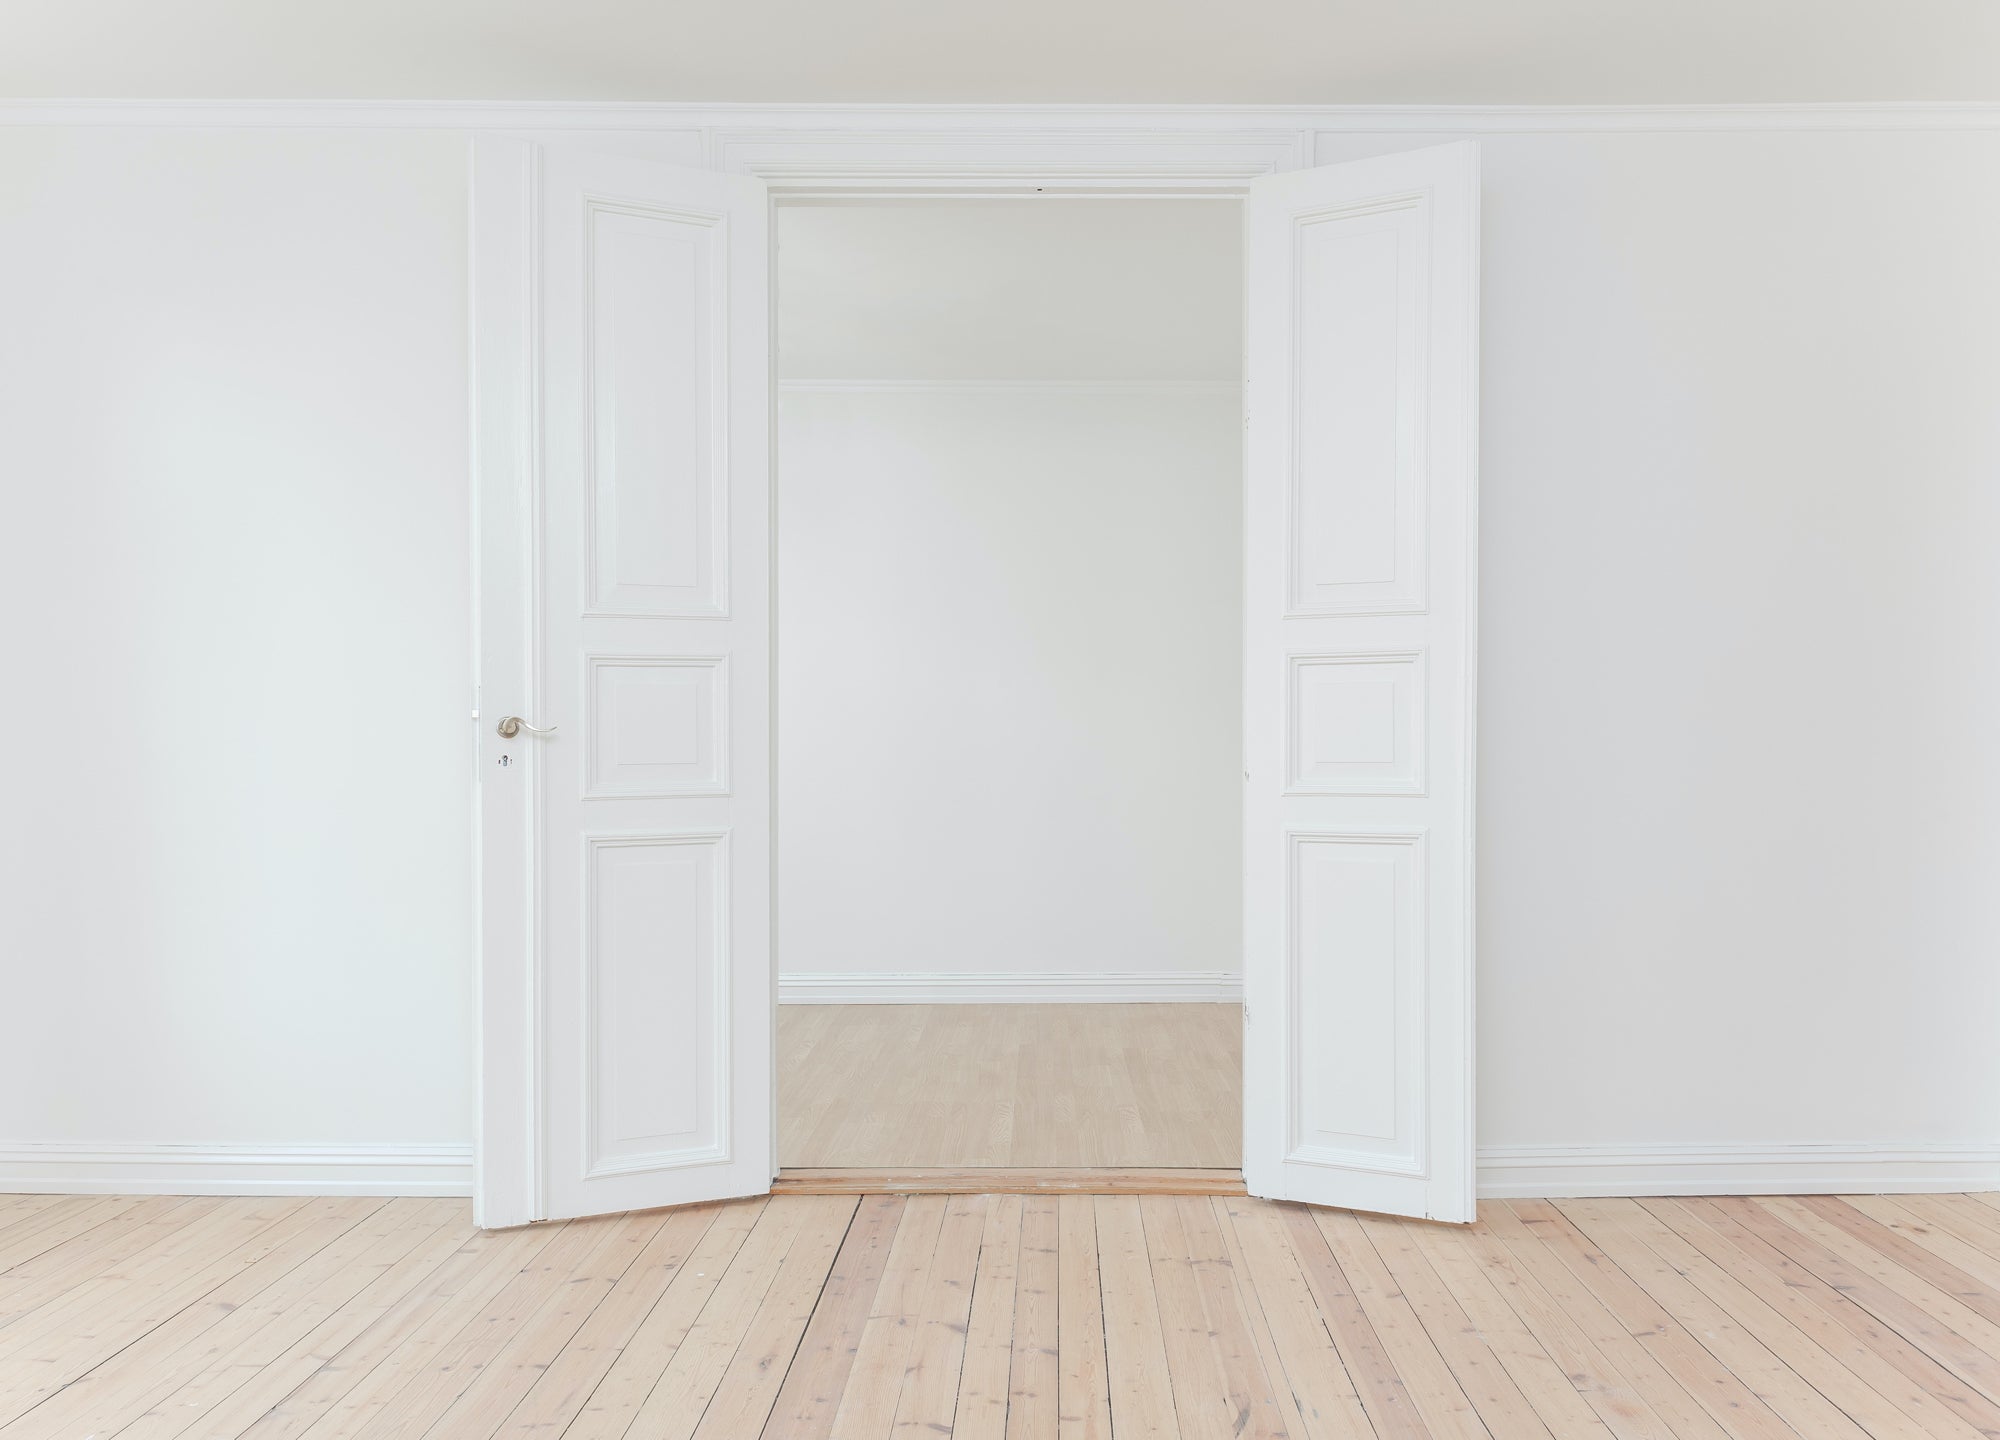 An empty room with wood florrs and white walls looks through a doorway into a similar empty room